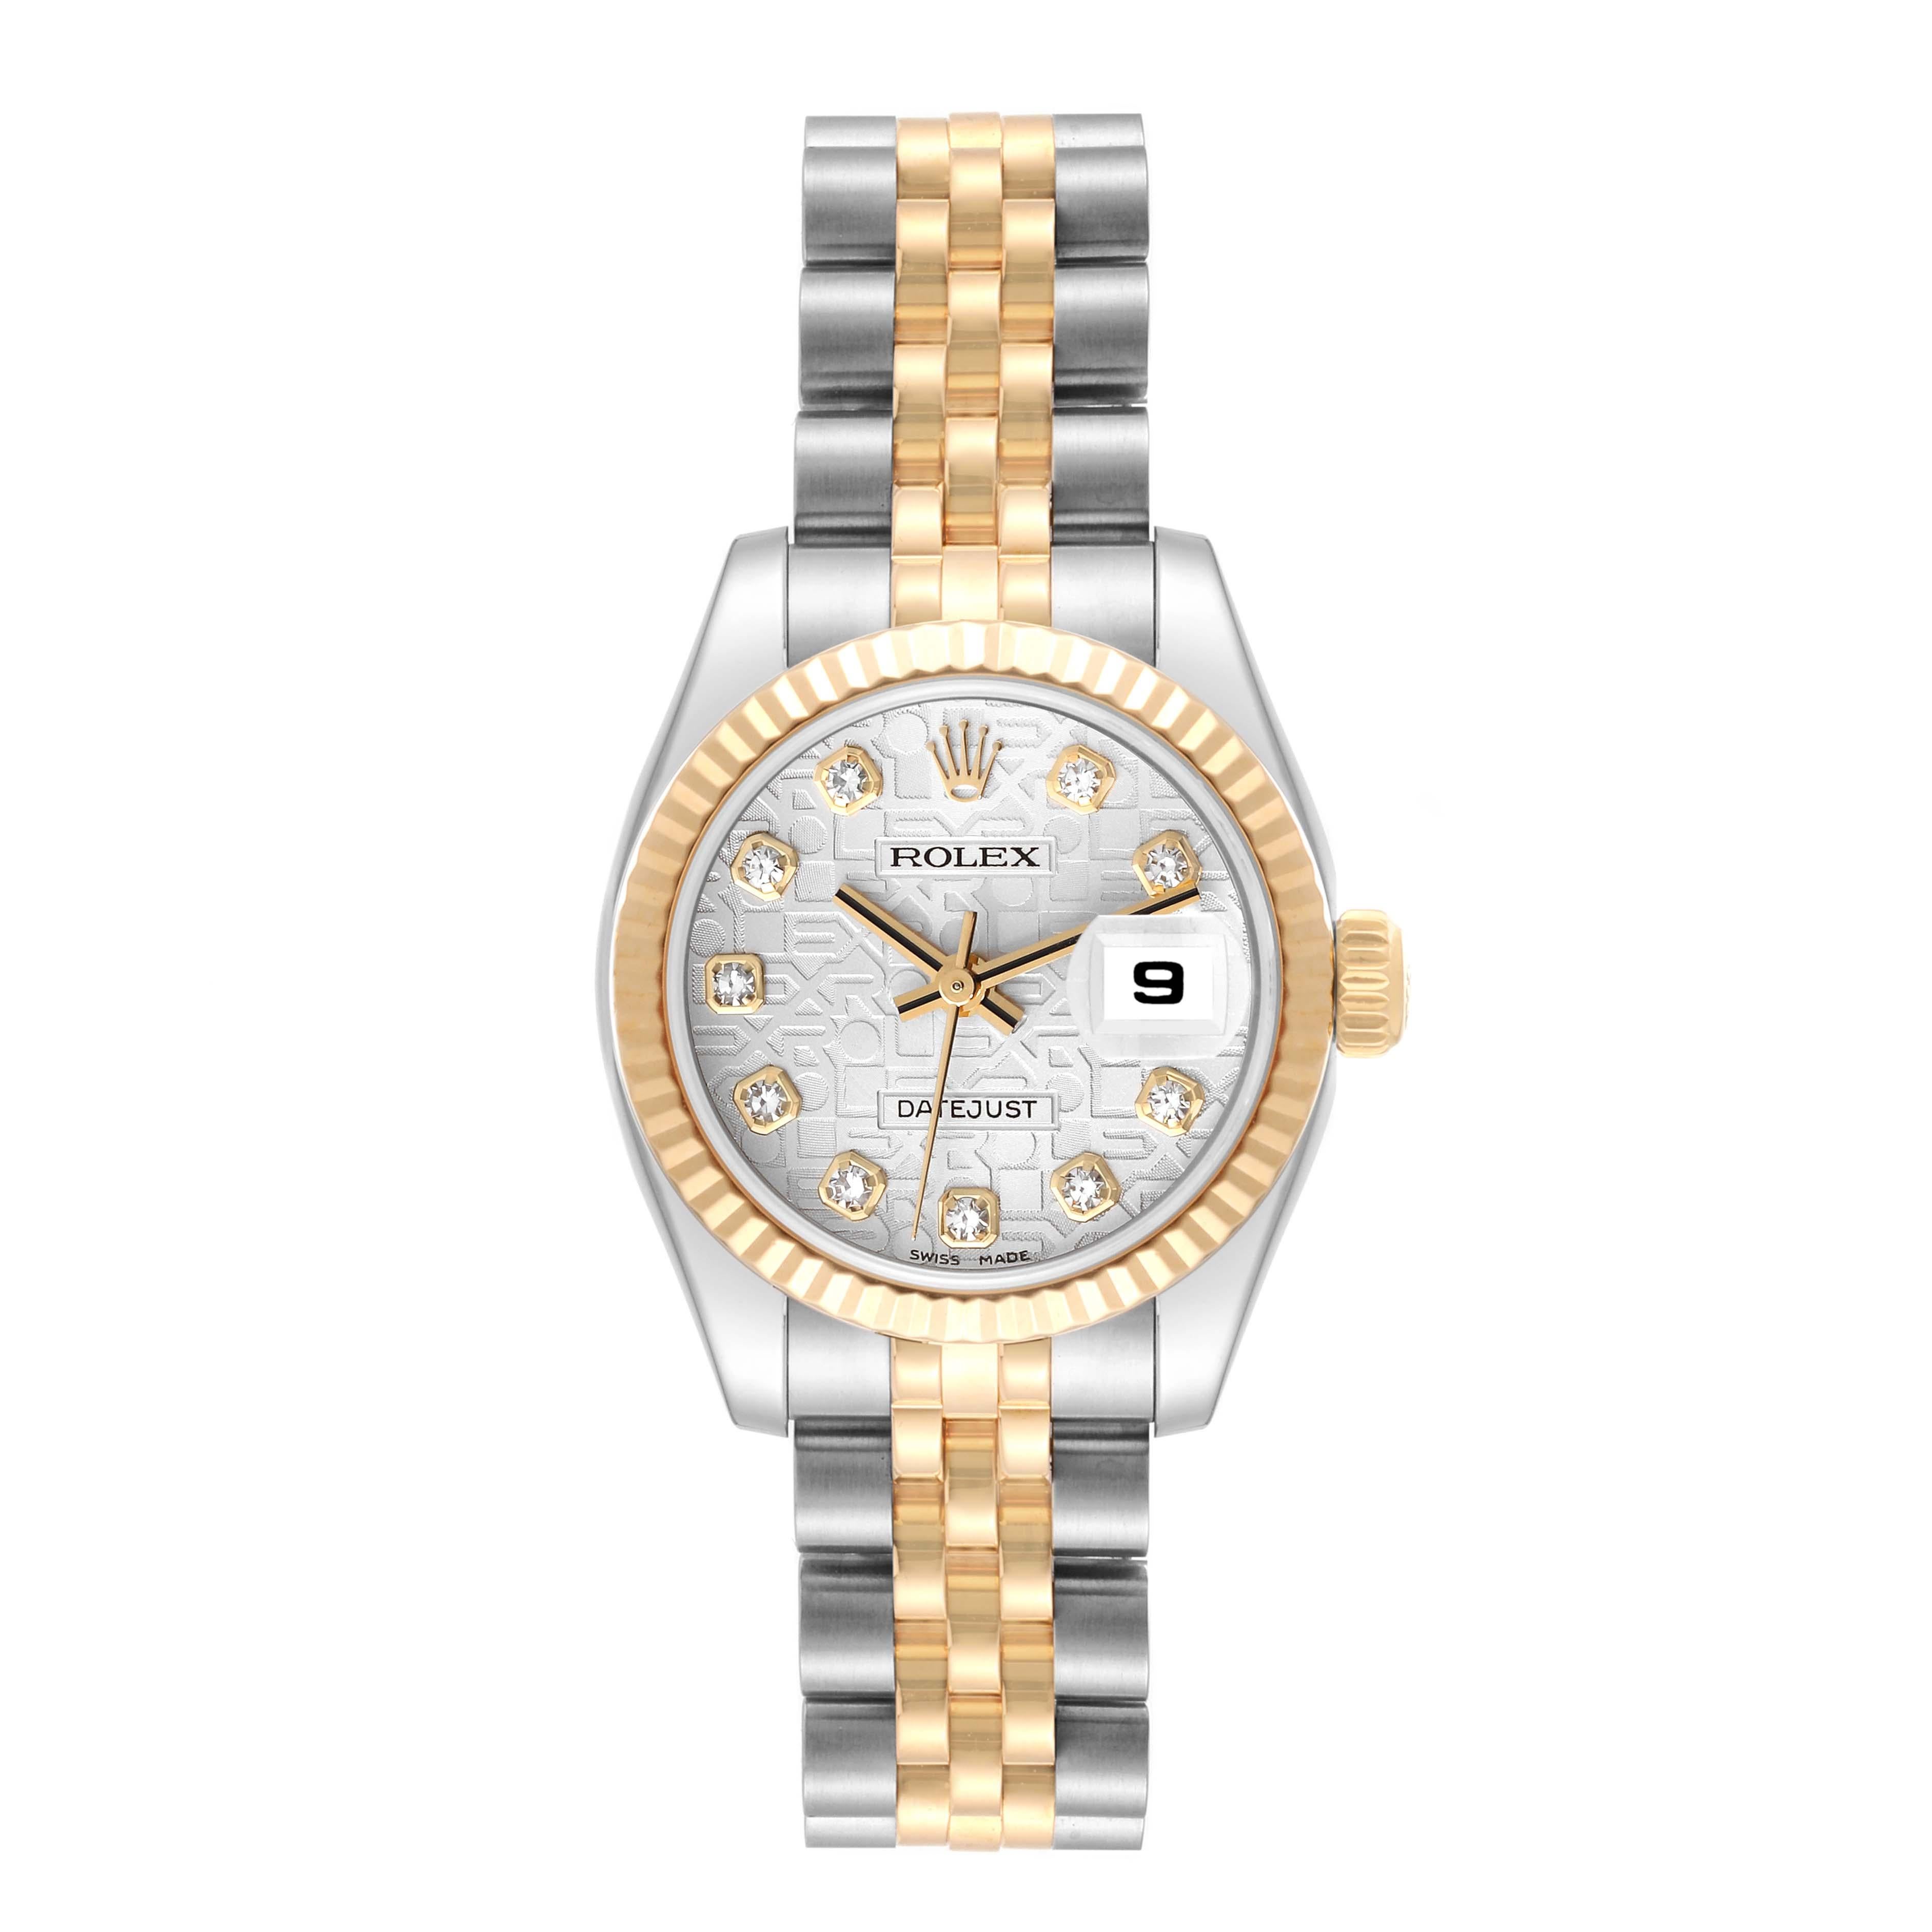 Rolex Datejust Steel Yellow Gold Anniversary Diamond Dial Ladies Watch 179173. Officially certified chronometer automatic self-winding movement. Stainless steel oyster case 26 mm in diameter. Rolex logo on an 18K yellow gold crown. 18k yellow gold